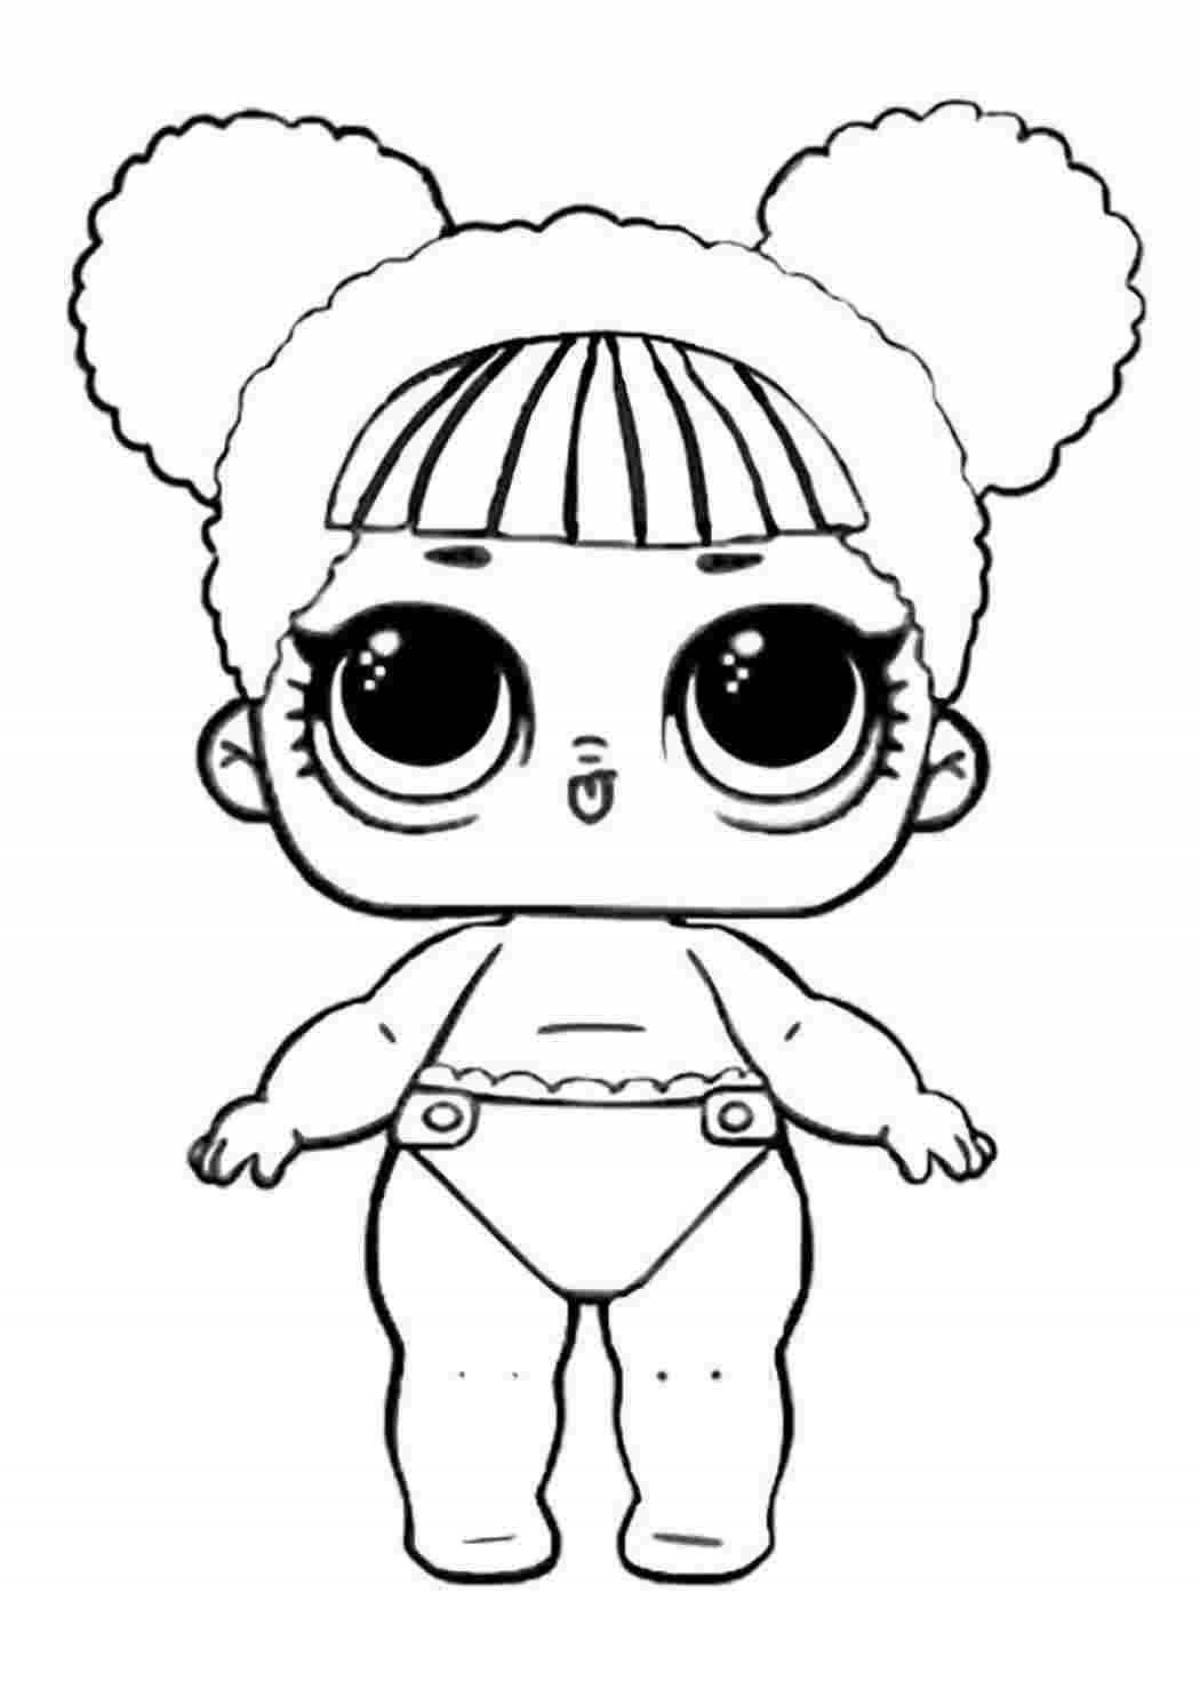 Charming coloring doll without clothes lol